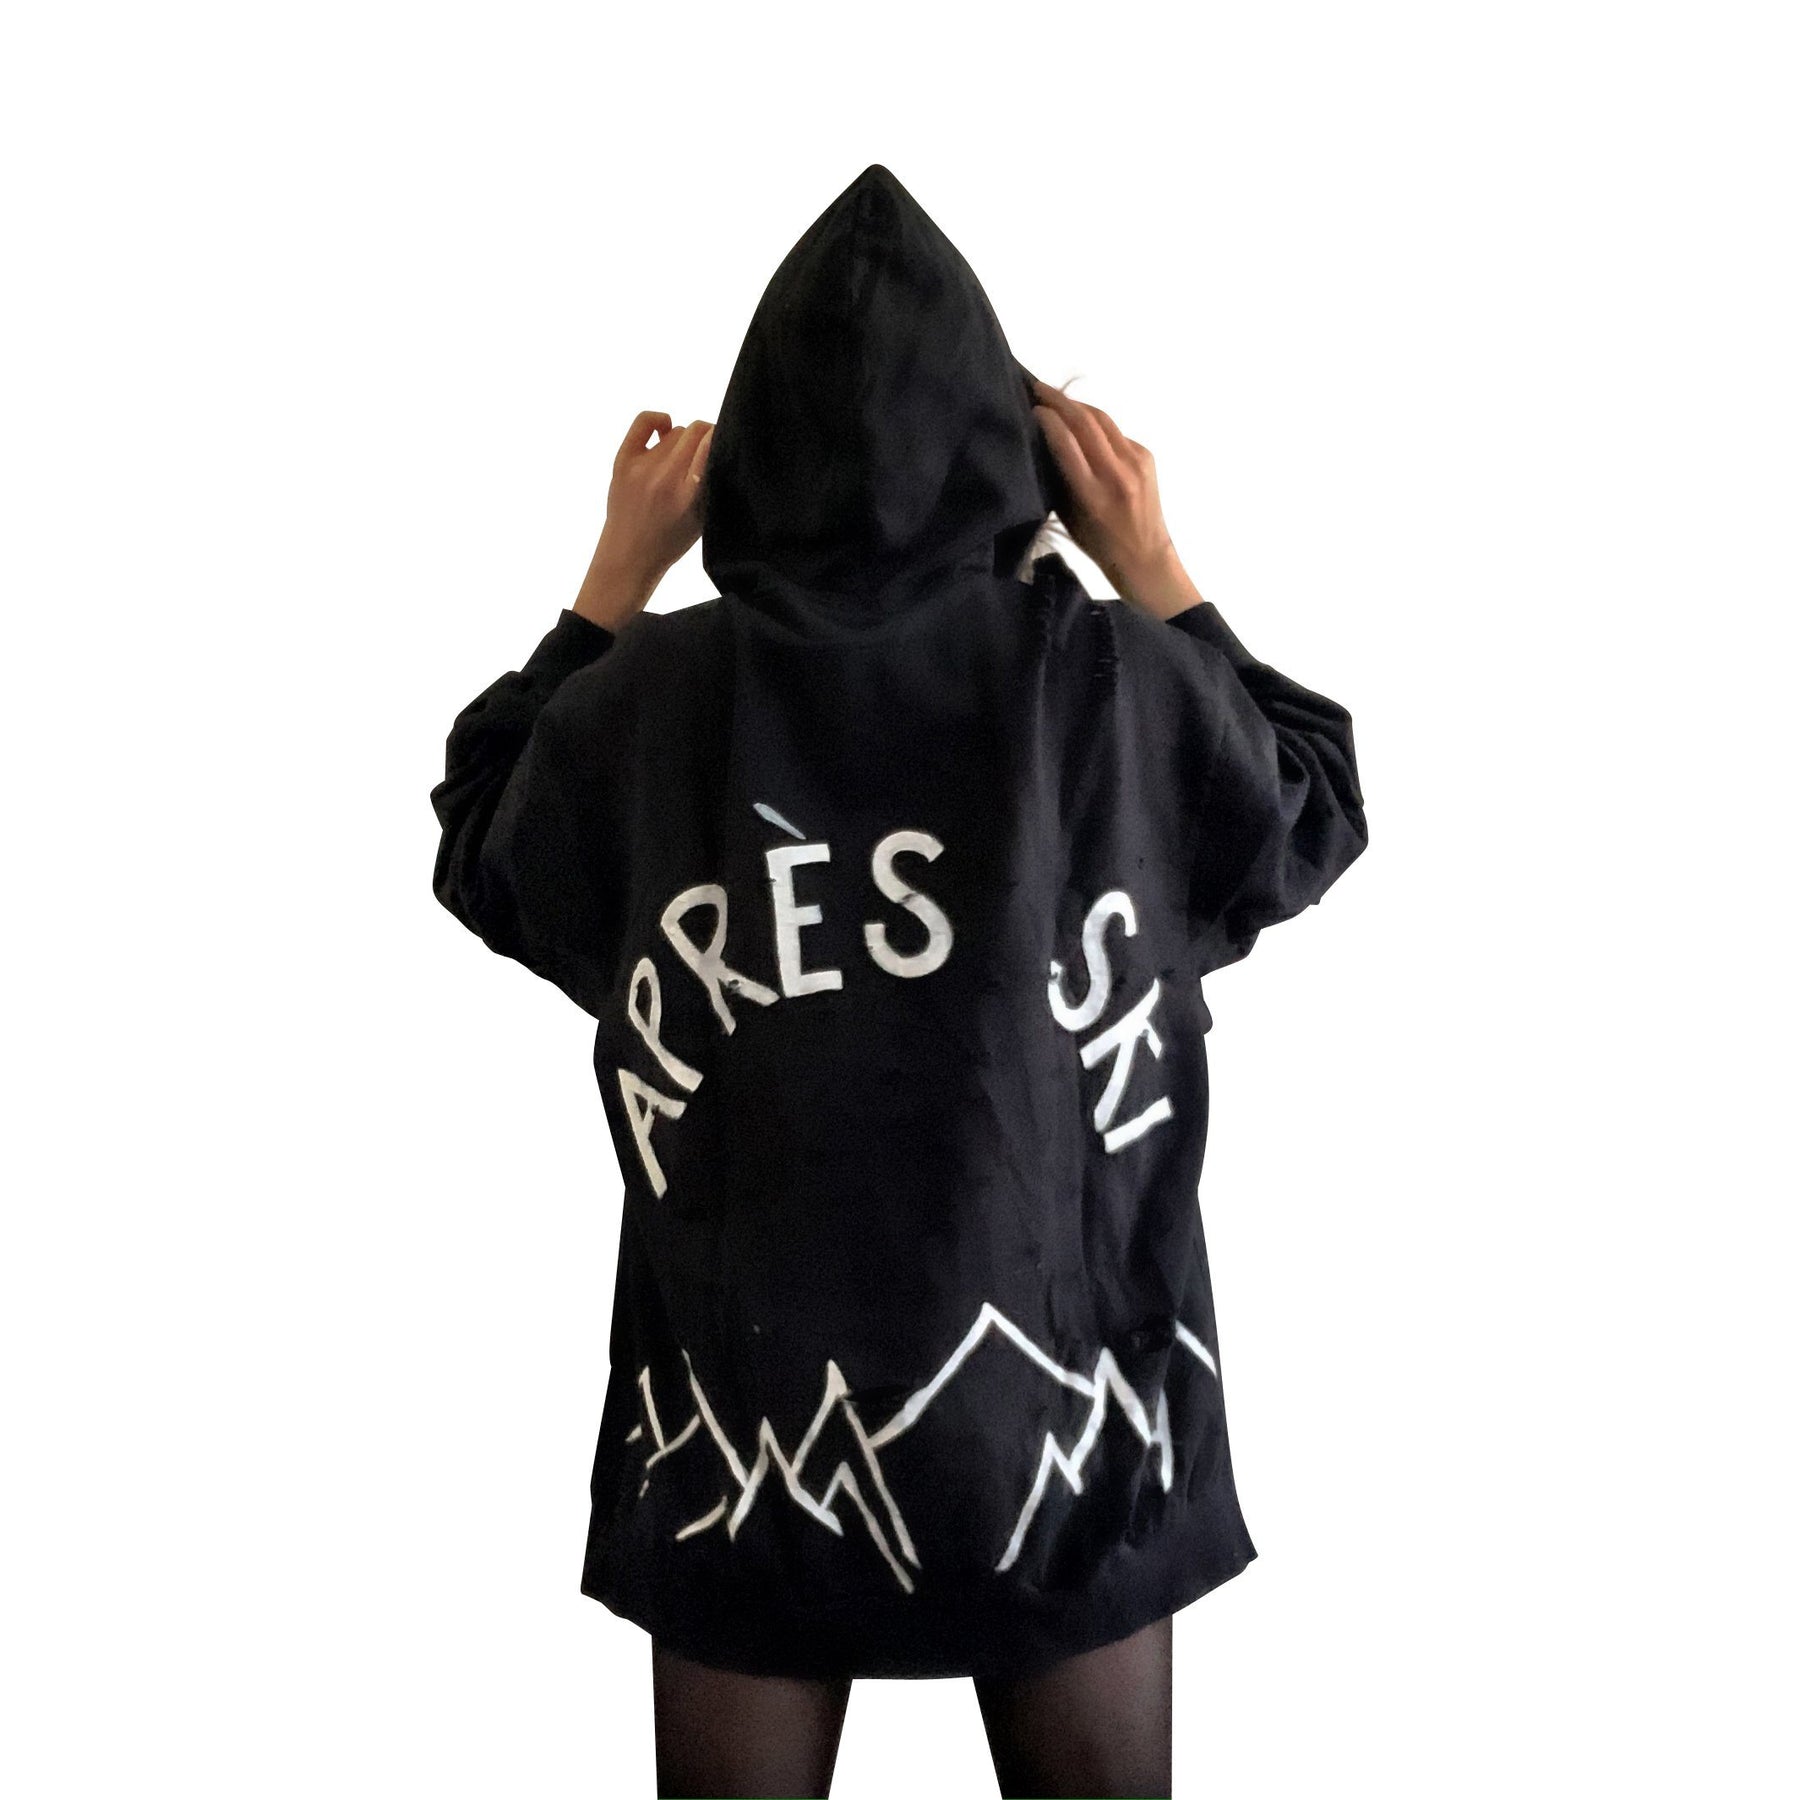 The perfect oversized black distressed hoodie. APRES SKI painted on back in semi circle, with mountain outline along bottom. Signed @wrenandglory